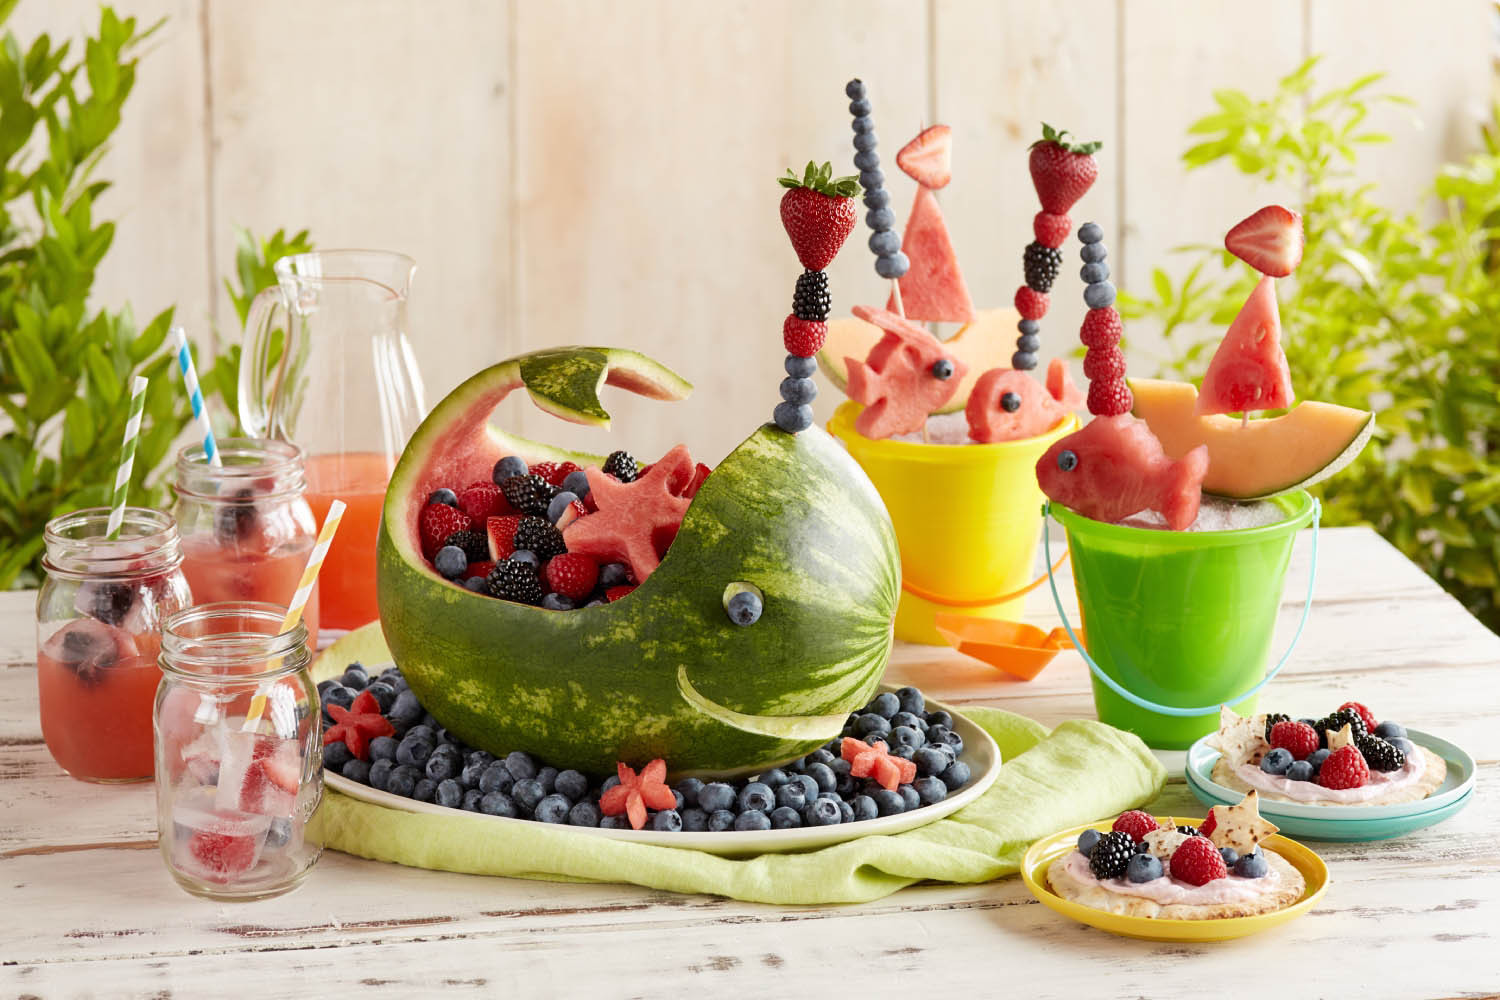 Childrens Beach Party Ideas
 Splash into Summer with a Berry Beach Party